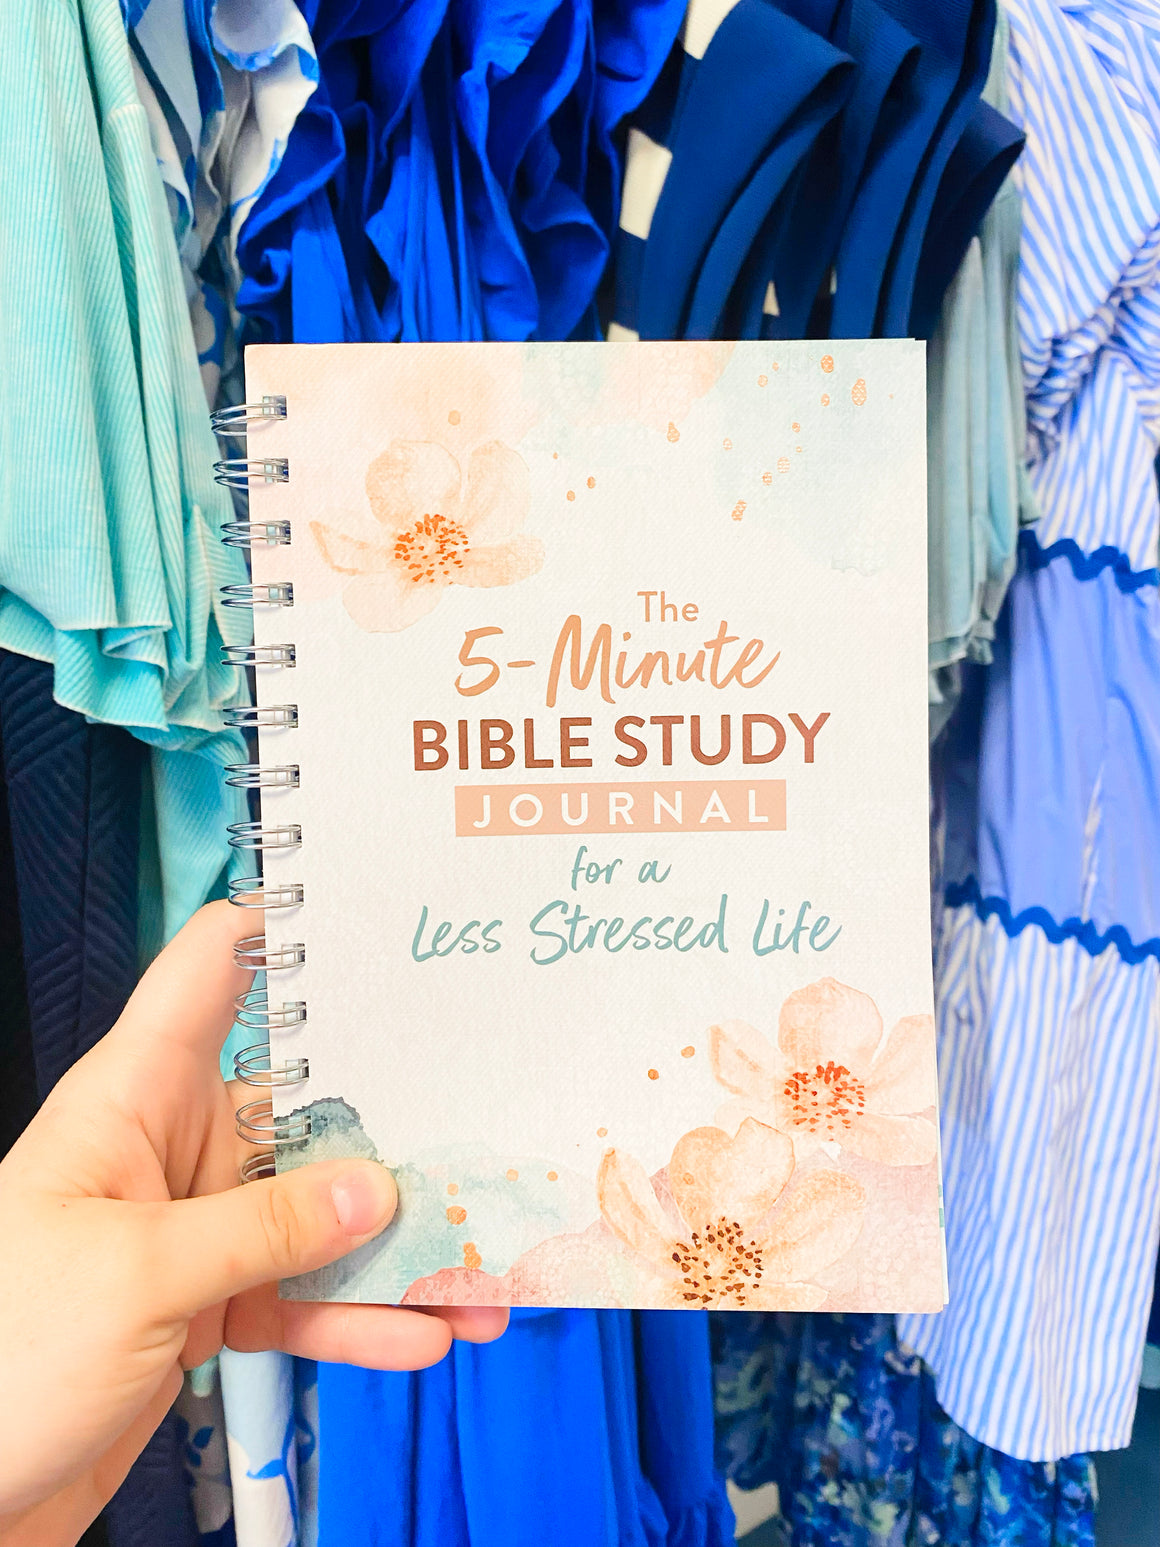 The 5-Minute Bible Study Journal for a Less Stressed